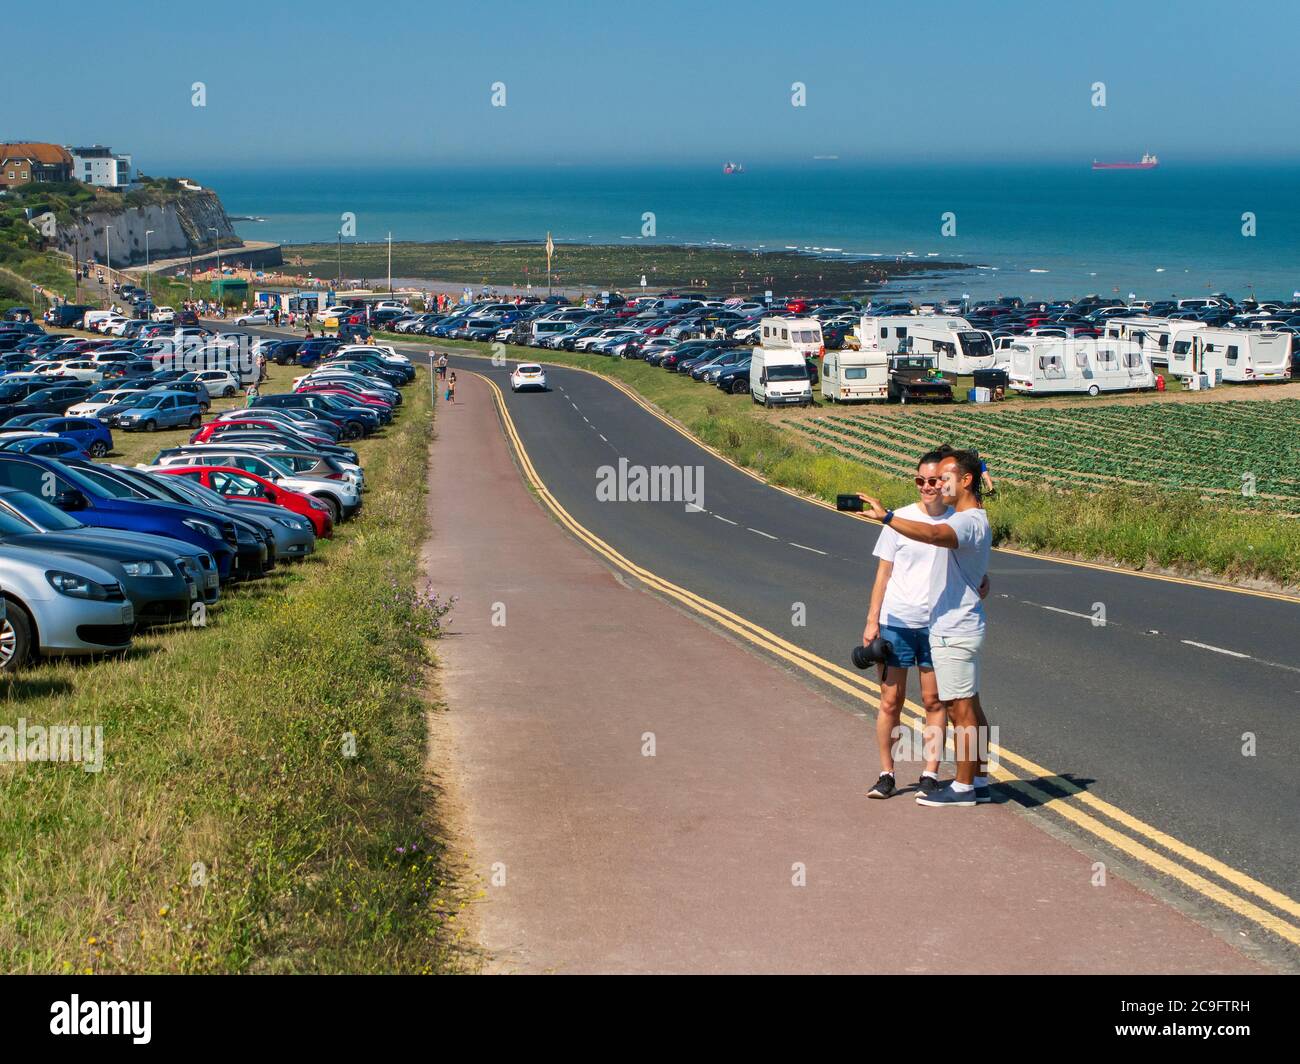 Joss Bay near Broadstairs Thanet Kent. Full Car parks at the beach. Stock Photo